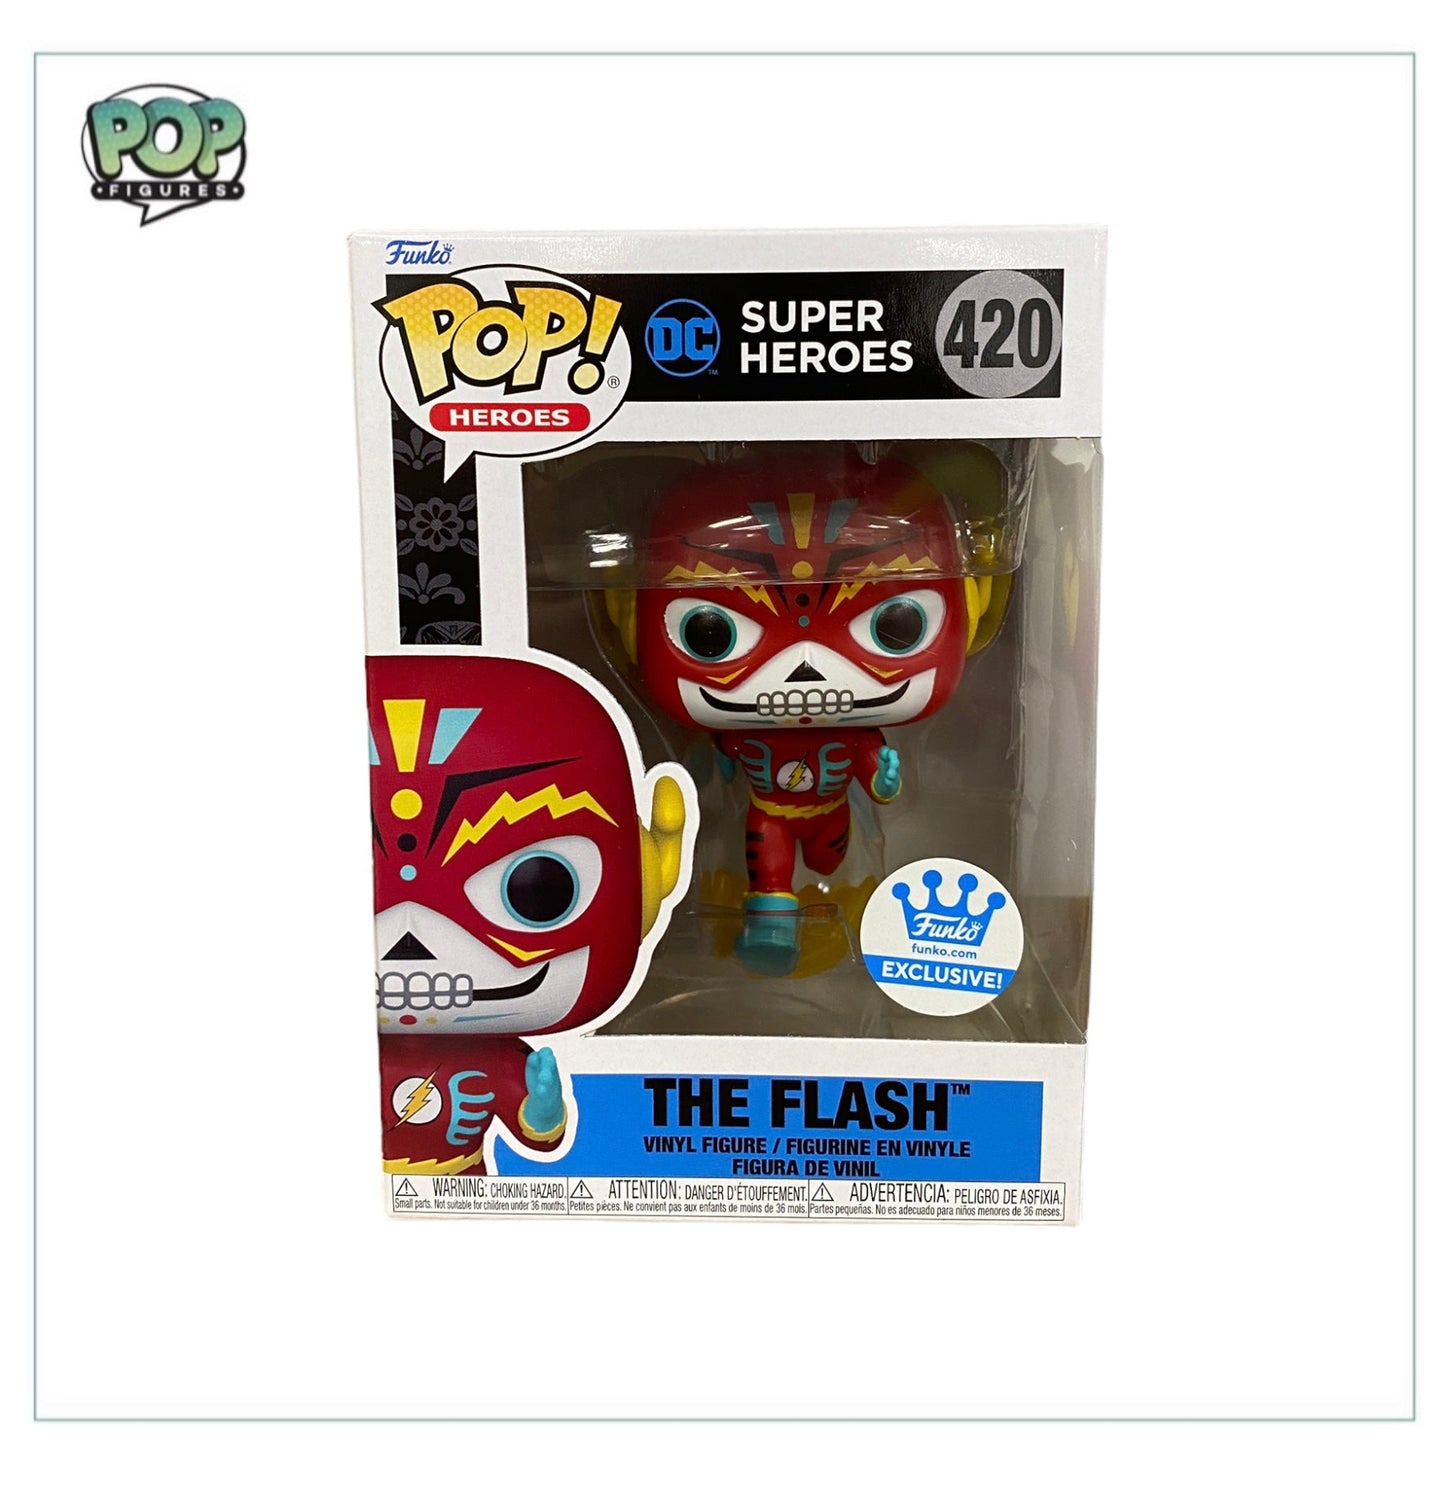 The Flash #420 - DC Heroes - Funko Shop Exclusive - Angry Cat